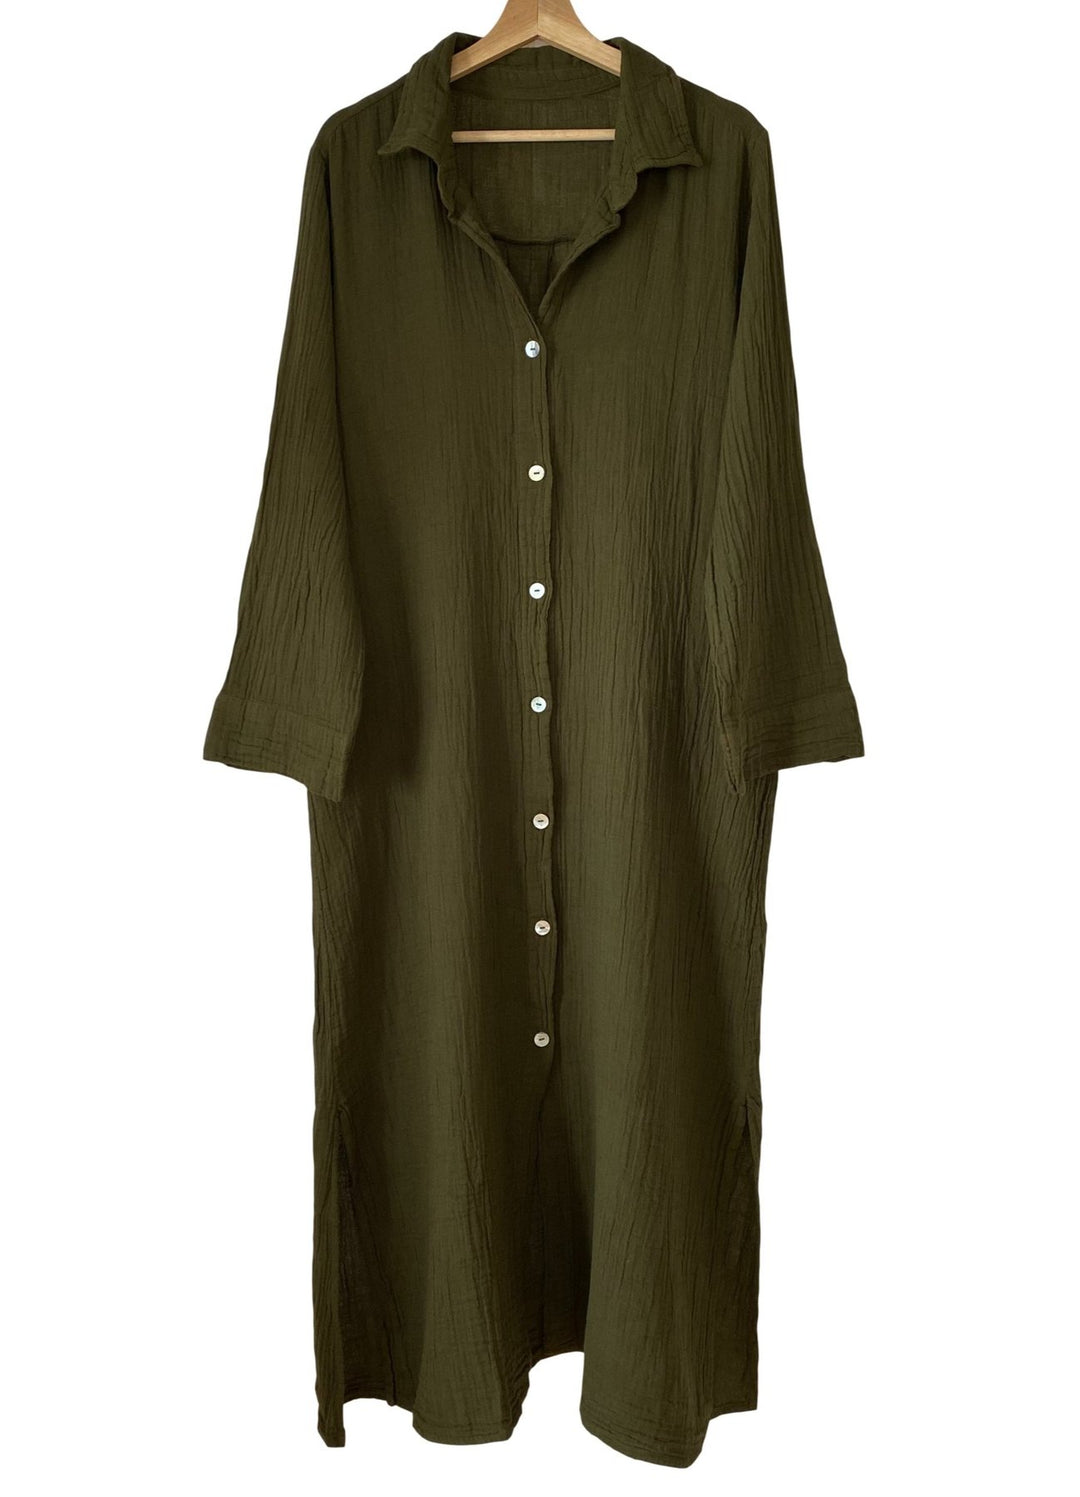 OLIVE SHELL SHIRT DRESS - Kingfisher Road - Online Boutique